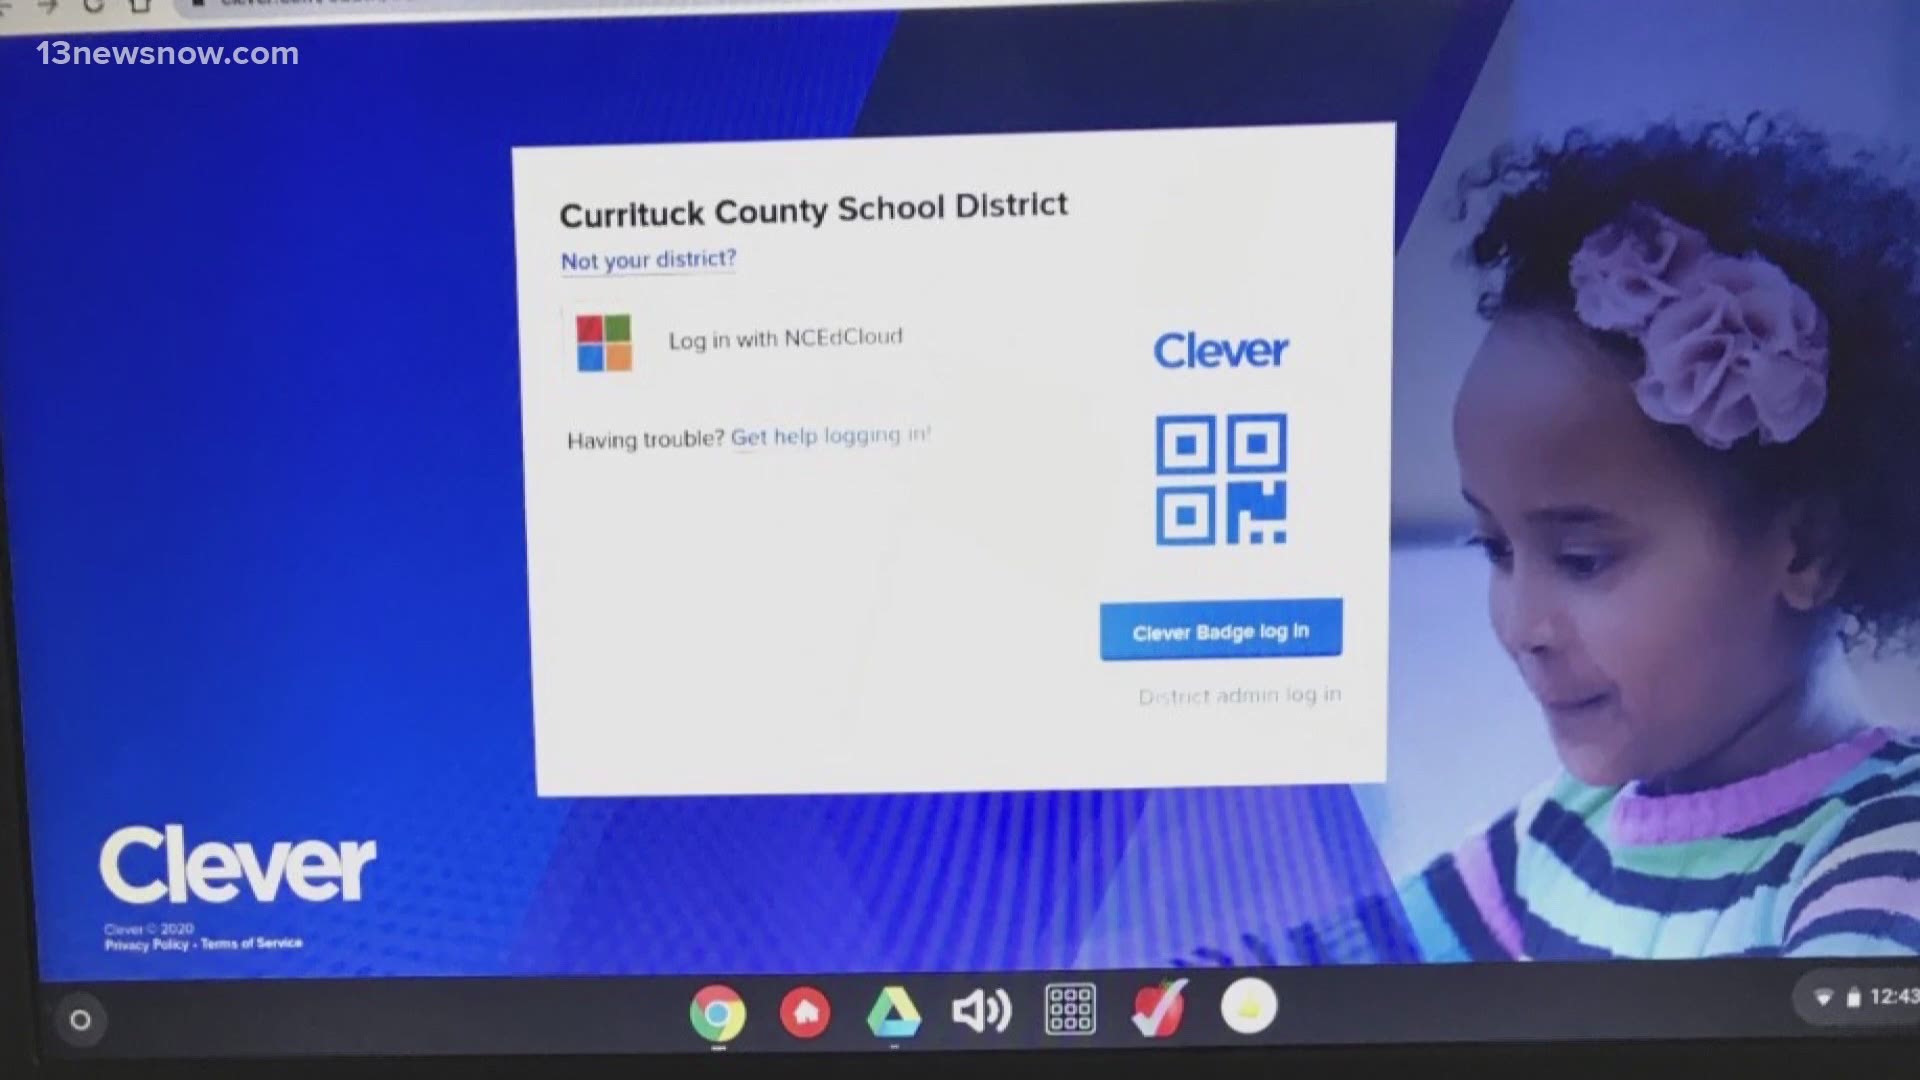 13News Now Megan Shinn has more on the outage that affected some North Carolina students' first day of school with virtual instruction.